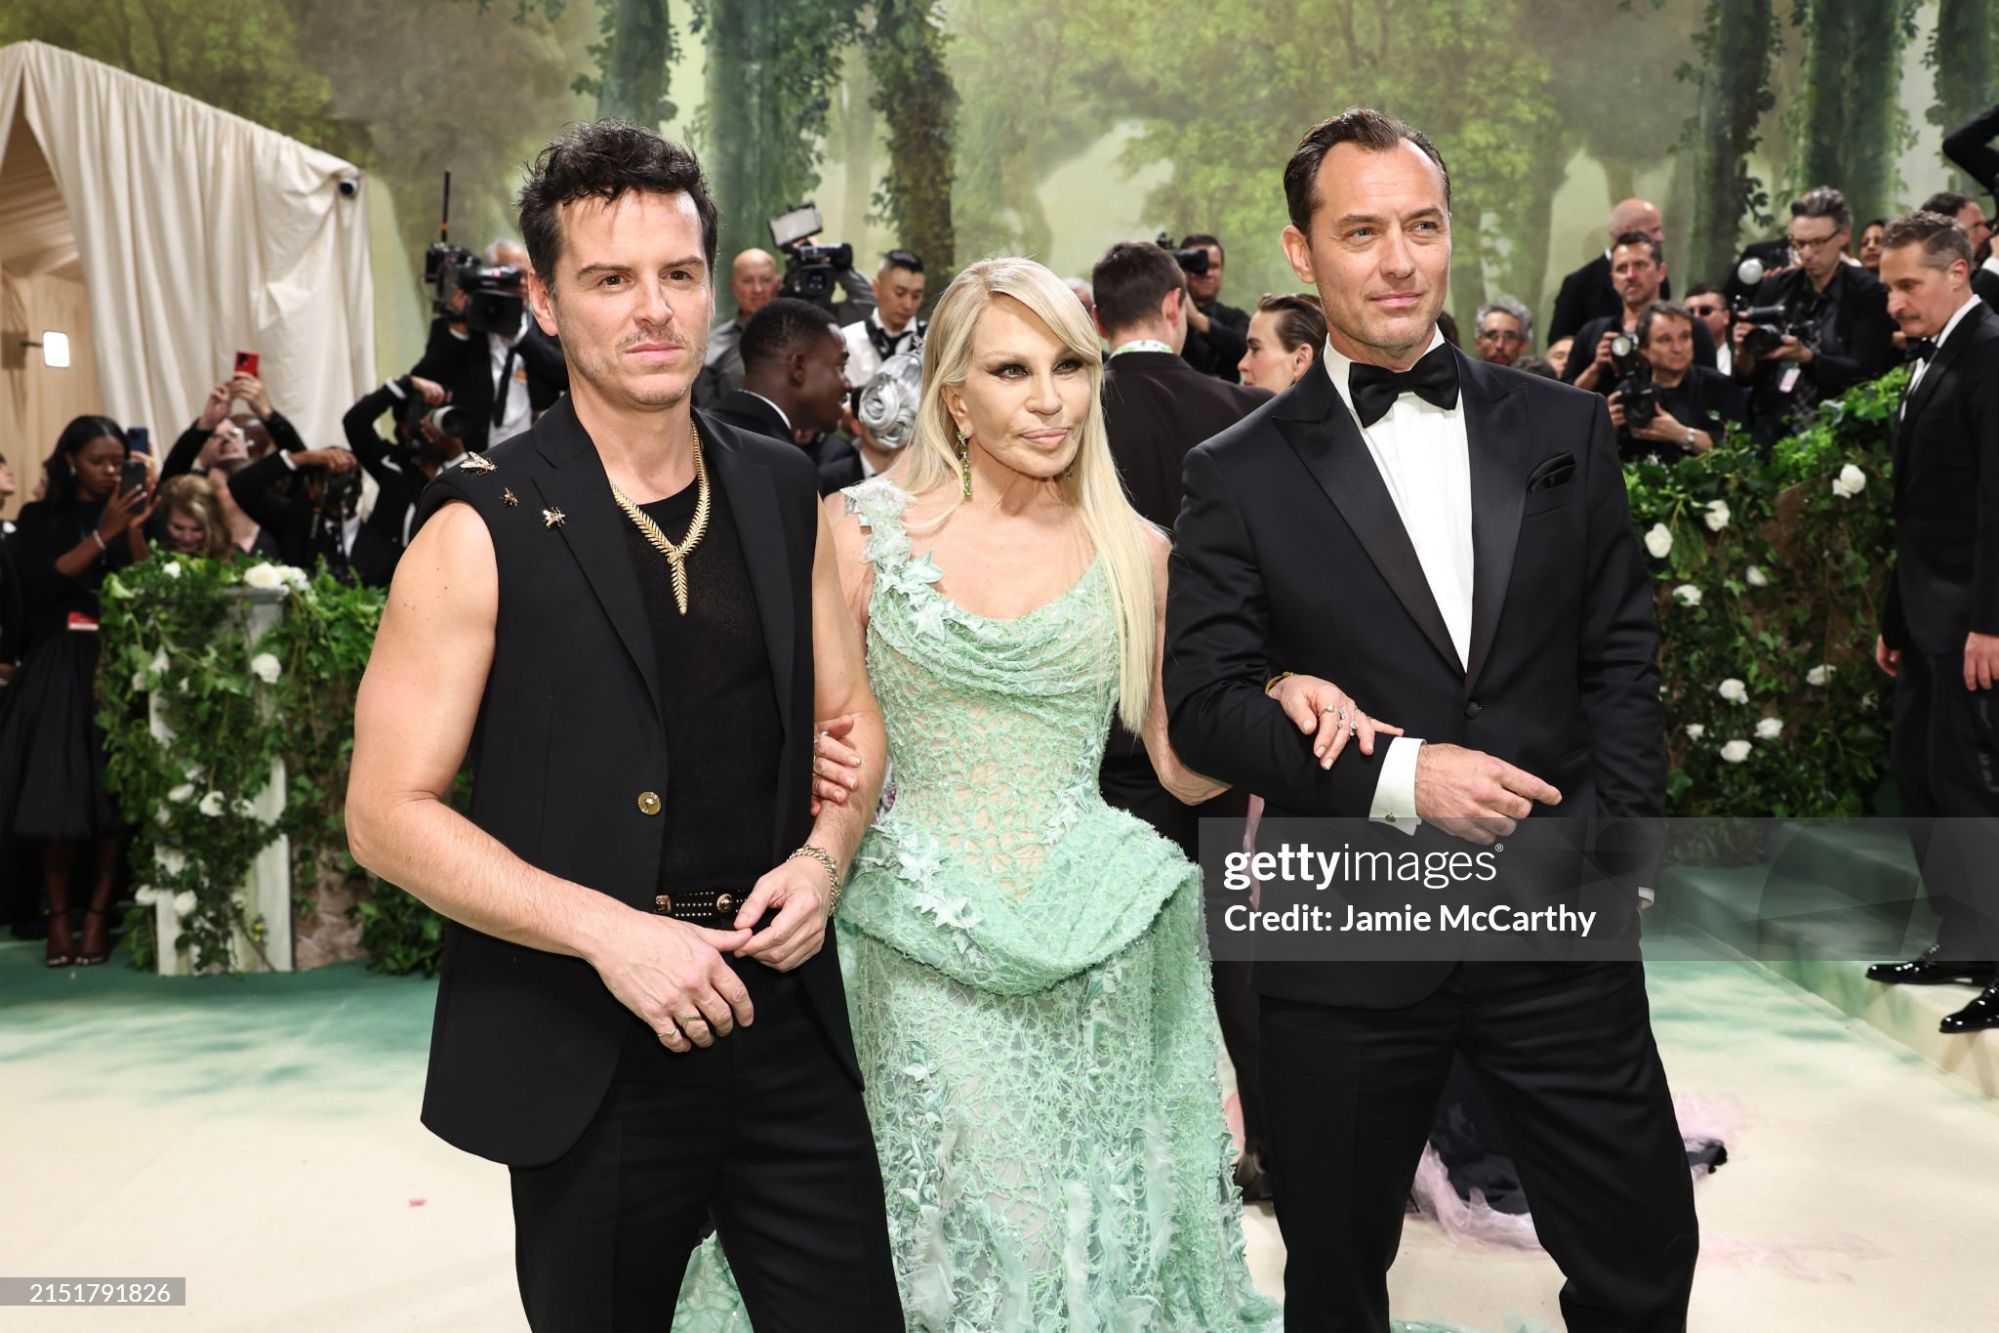 gettyimages-2151791826-2048x2048.jpg